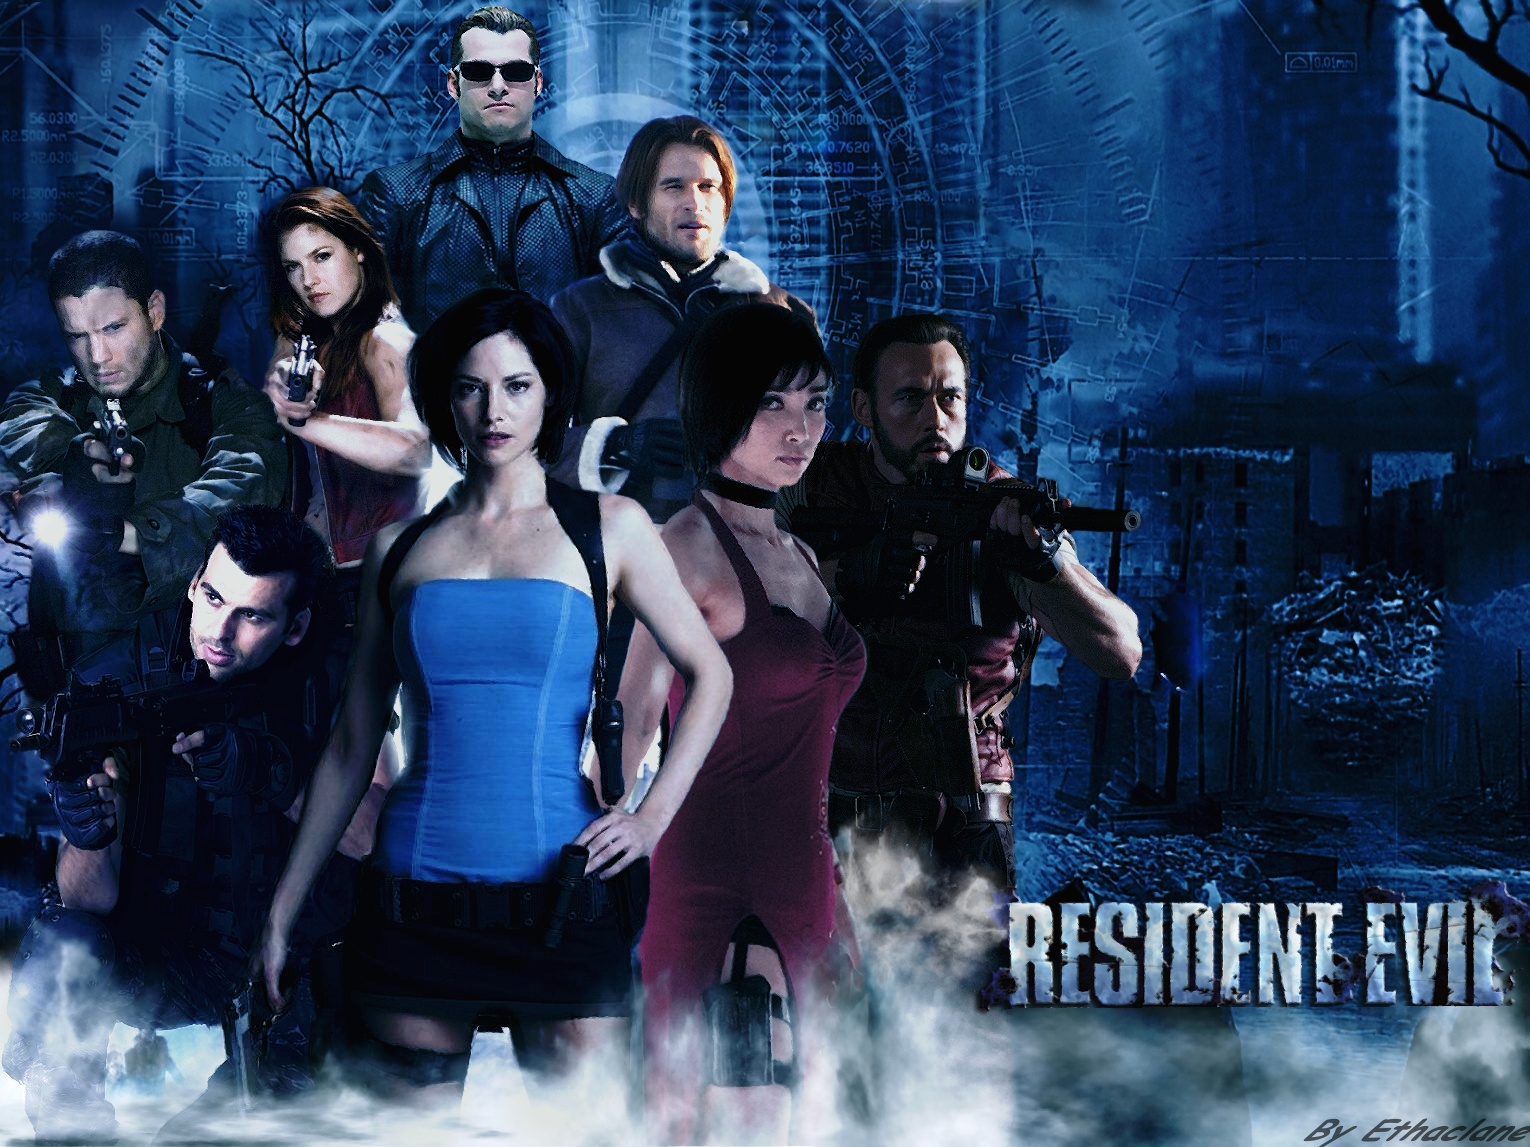 resident evil all movies in hindi free download